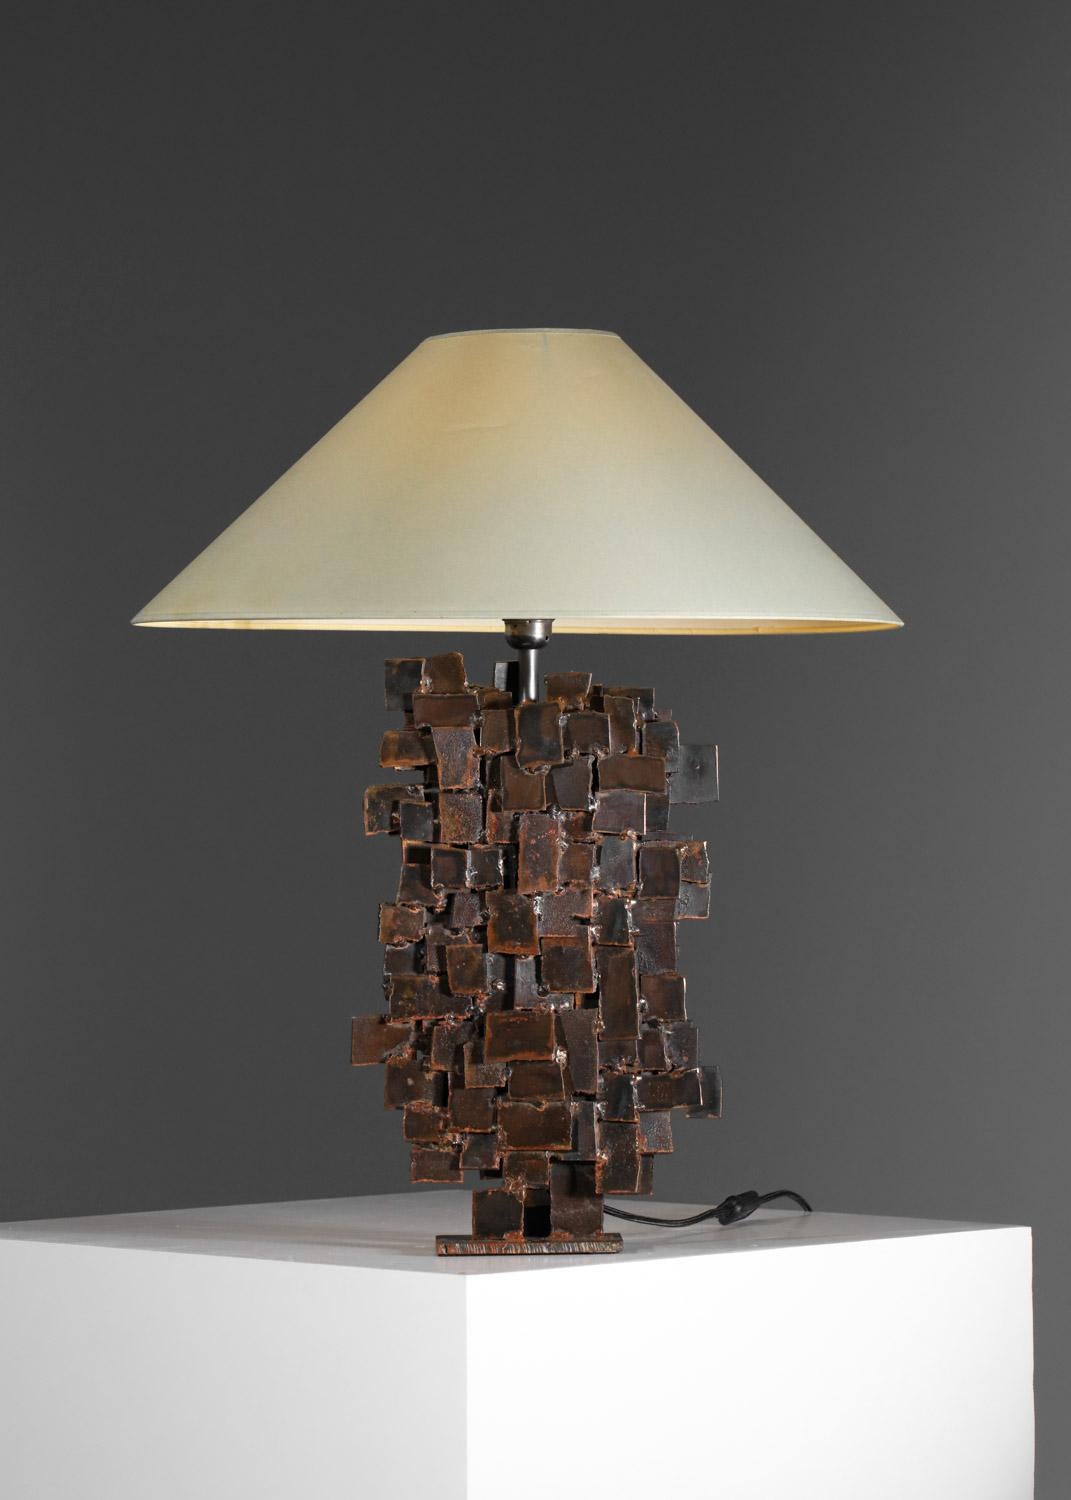 Imposing Brutalist table lamp by French artist Donna. Its sculptural base in patinated metal was handcrafted in the artist's studio. A sober, elegant and highly decorative designer. Artist's signature (see photos). E14 LED bulb recommended.